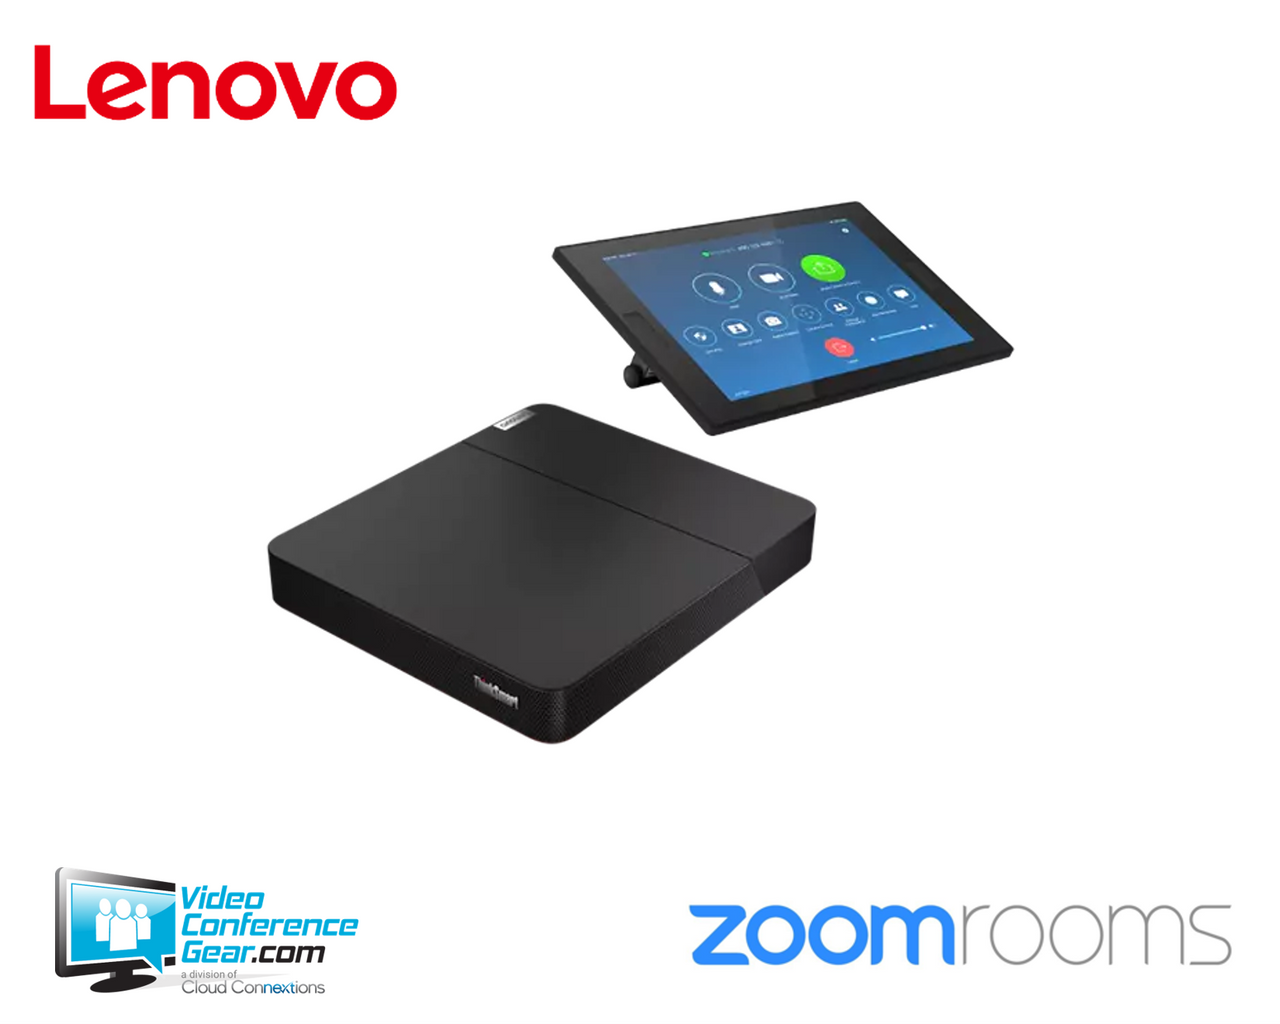 Yamaha ADECIA, Lenovo and Aver large conference room ZOOM solution. ADECIA Wired Microphones, LEN Thinksmart Core & Controller with Aver CAM520 Pro 2